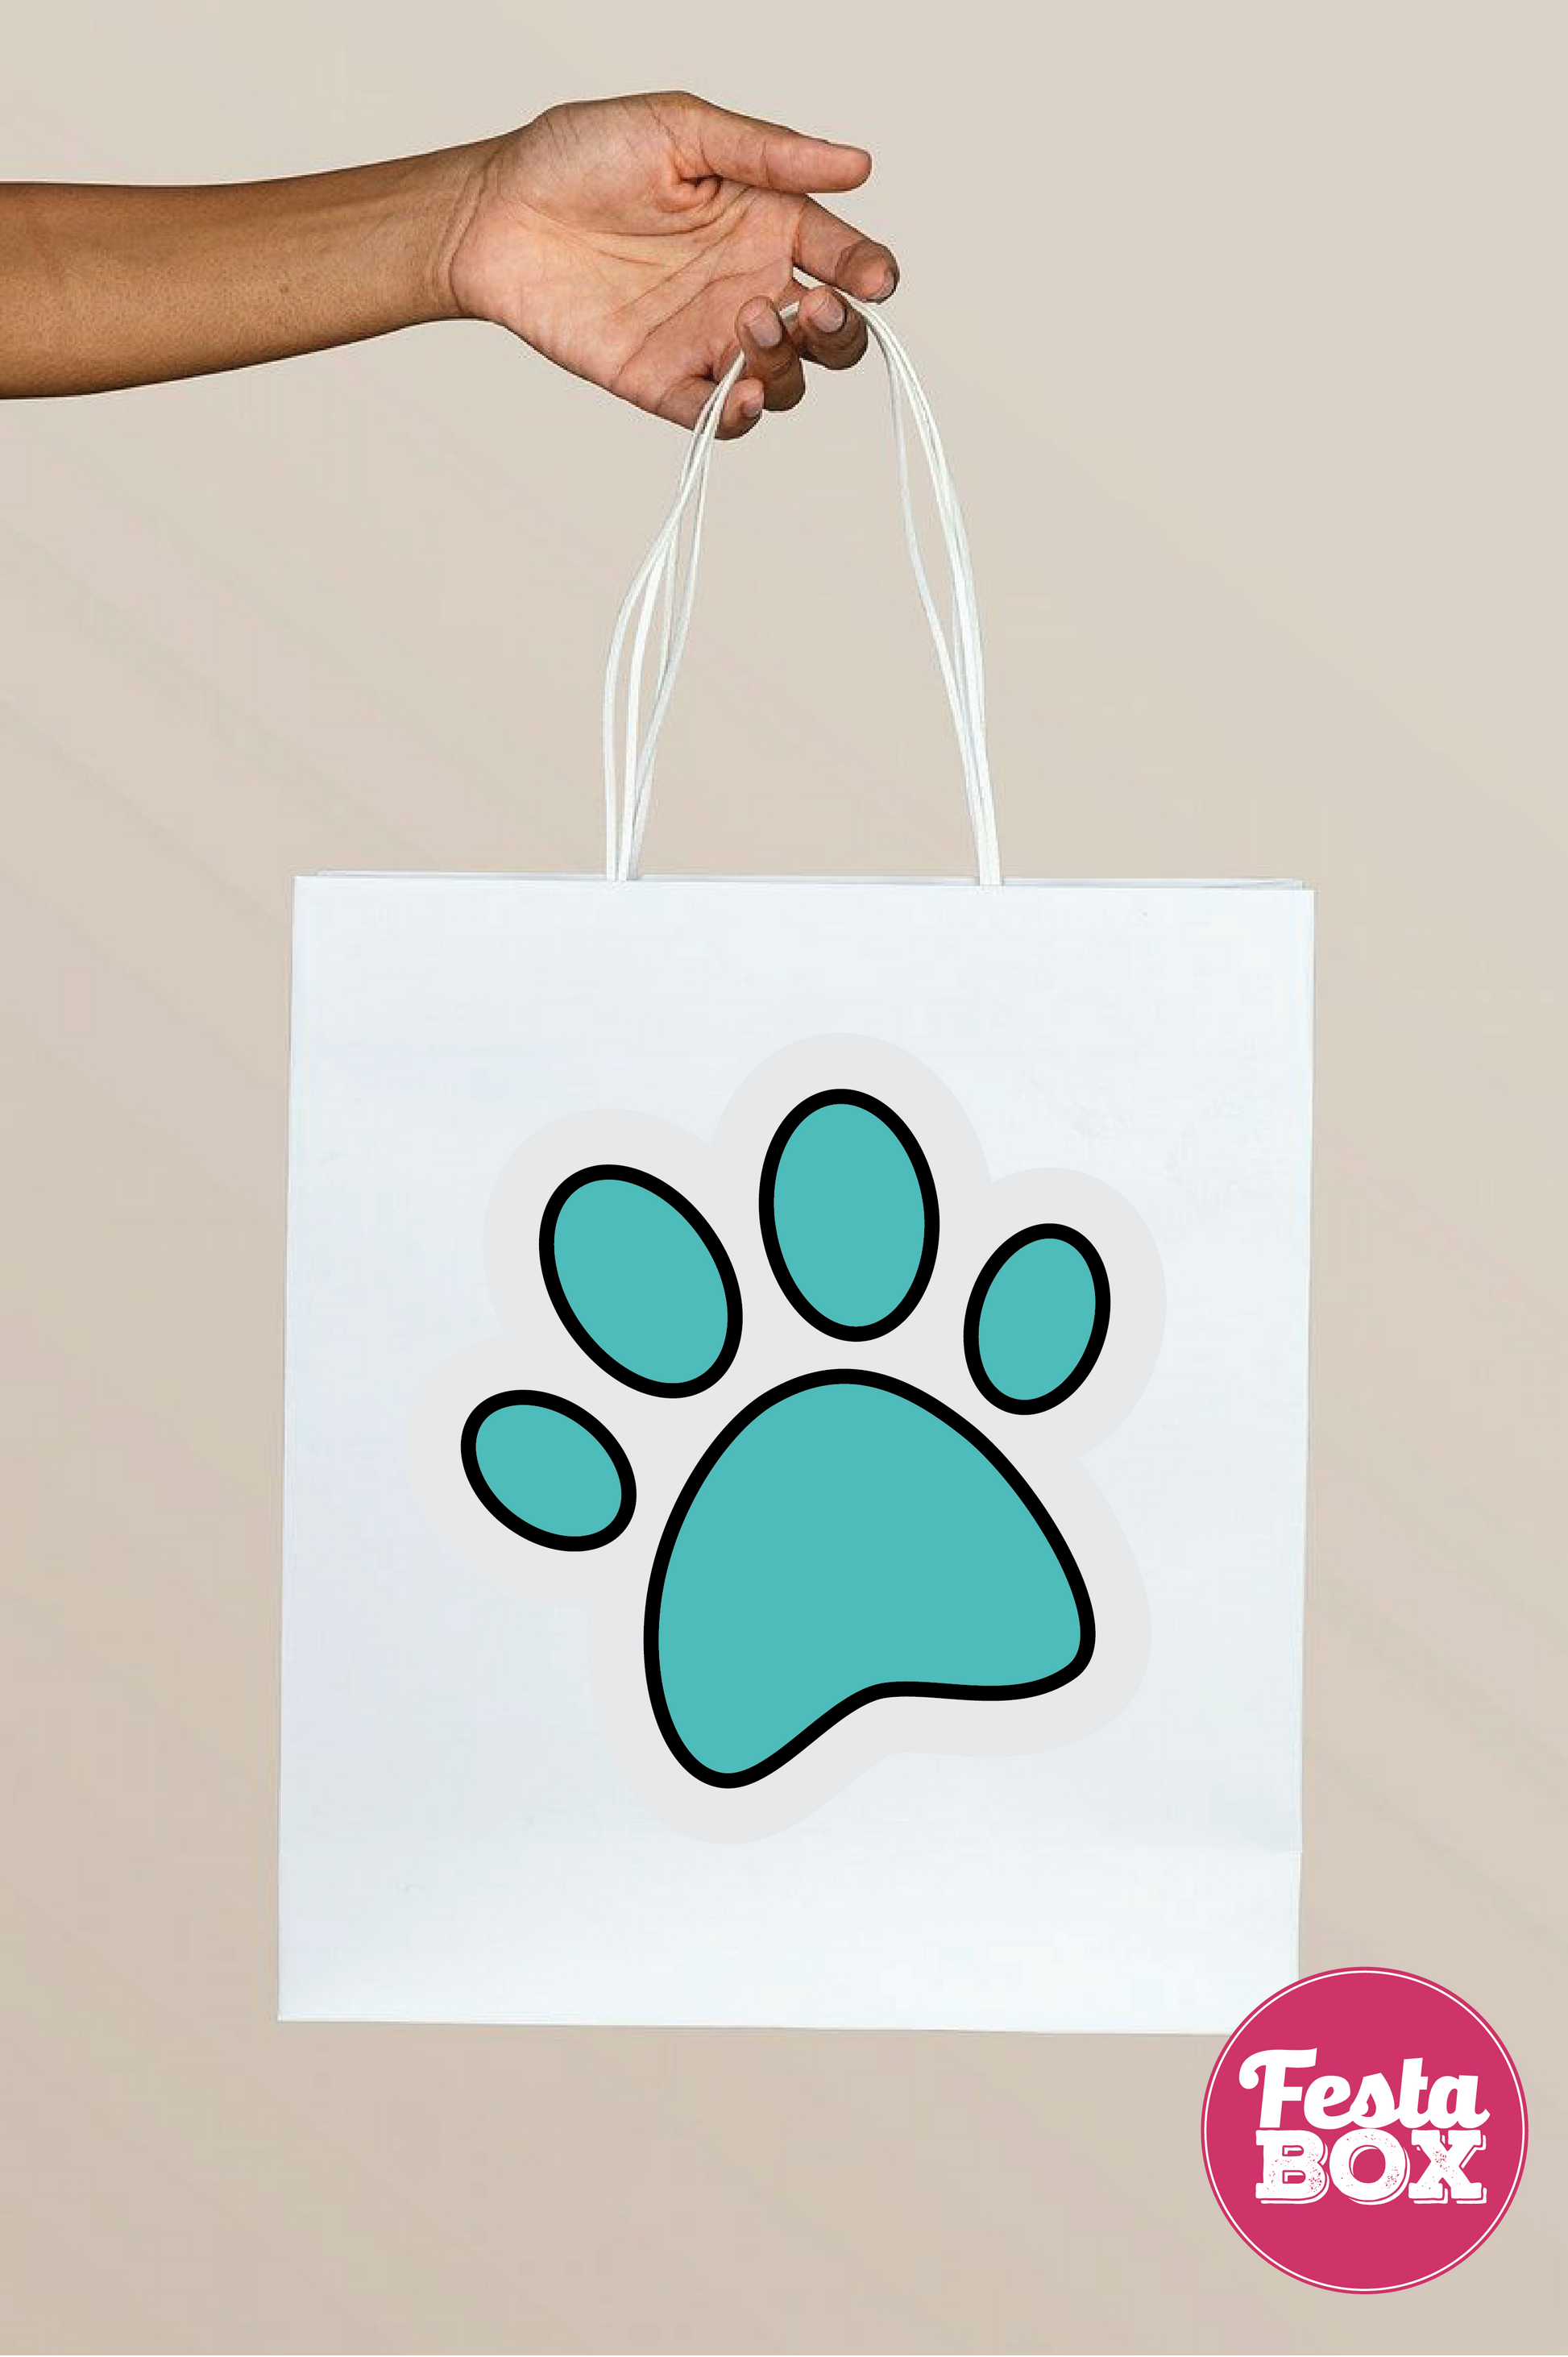 Return gift bags with the Puppy Birthday Party Theme Collection by Festabox